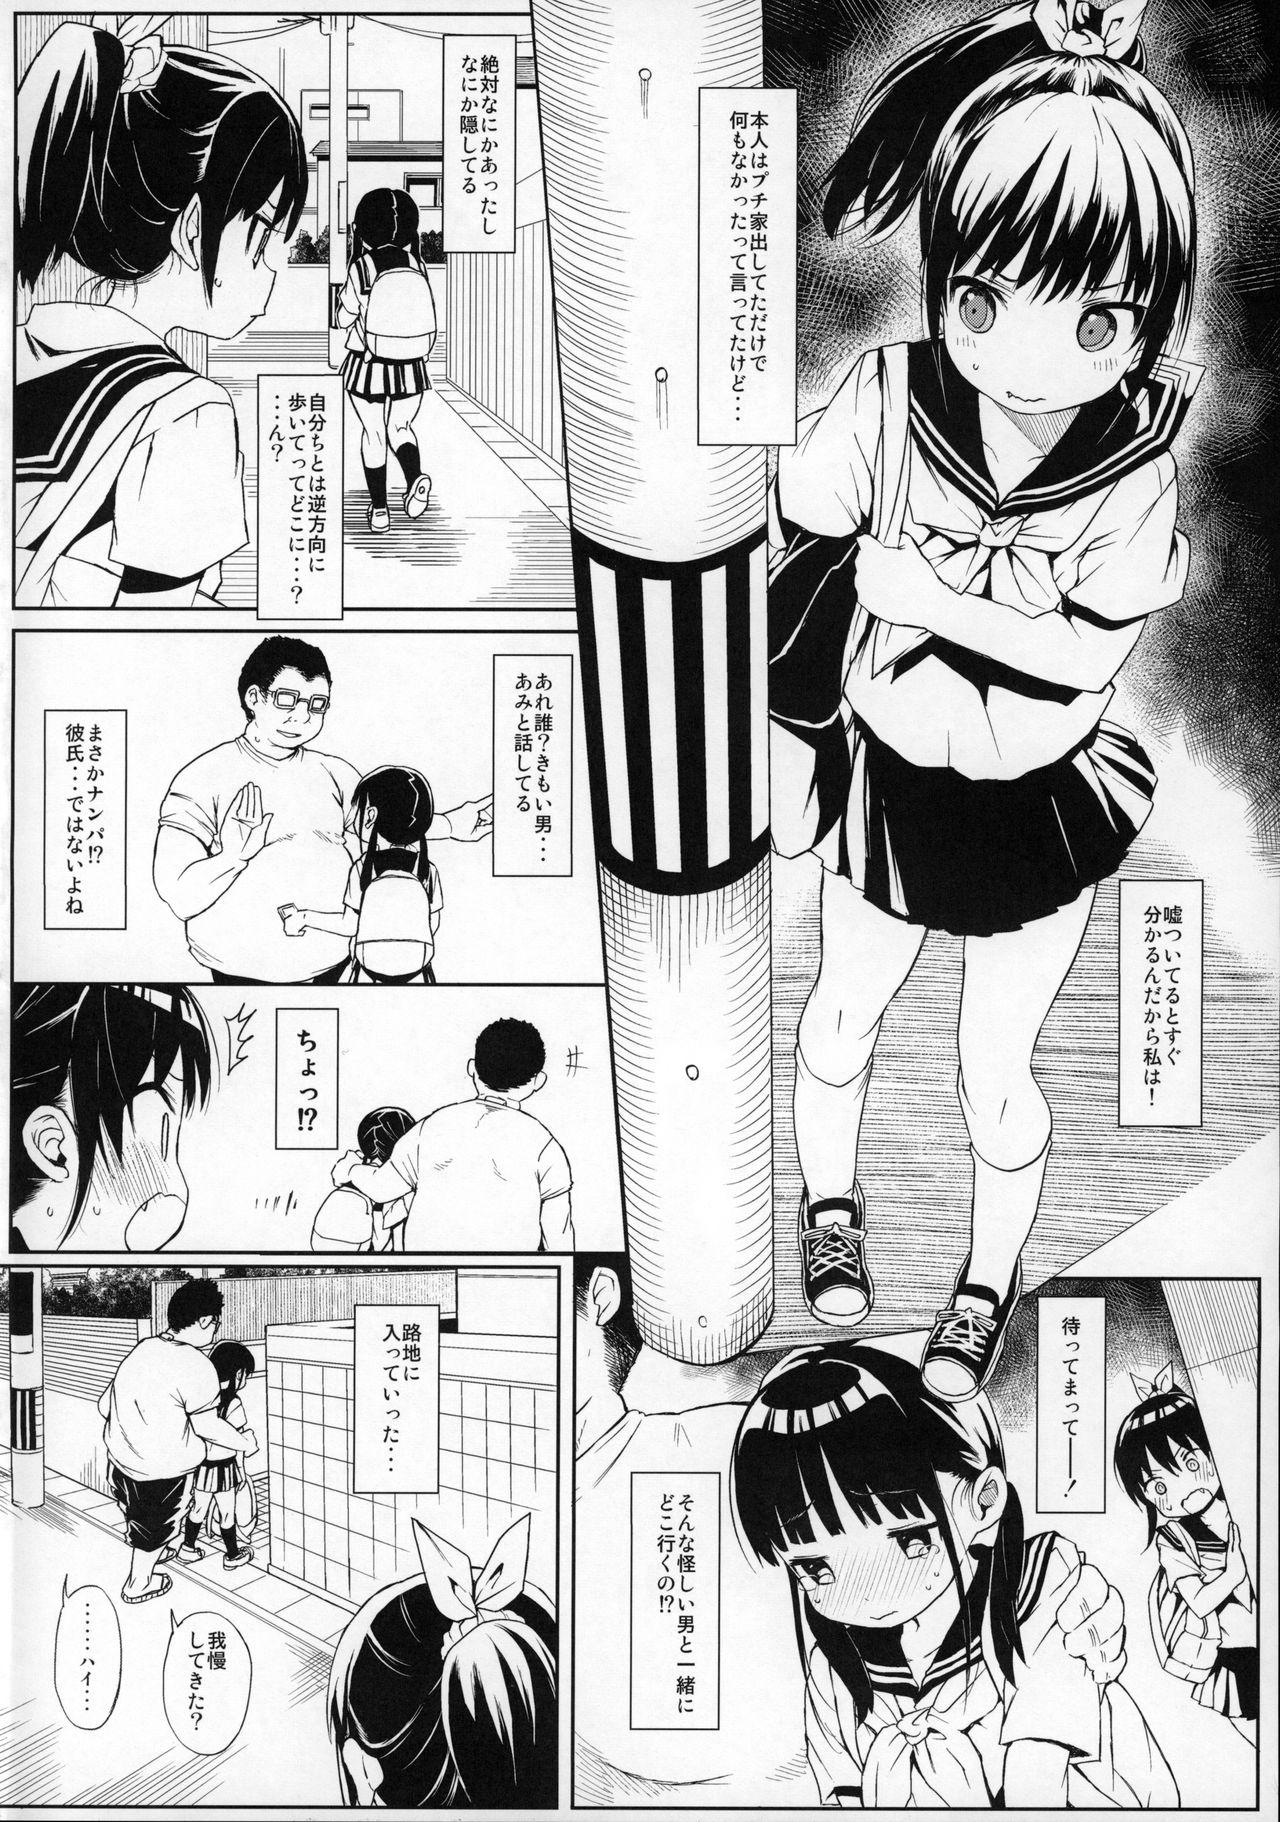 Ass Licking Comike no Omake Matome part 1 Affair - Page 5